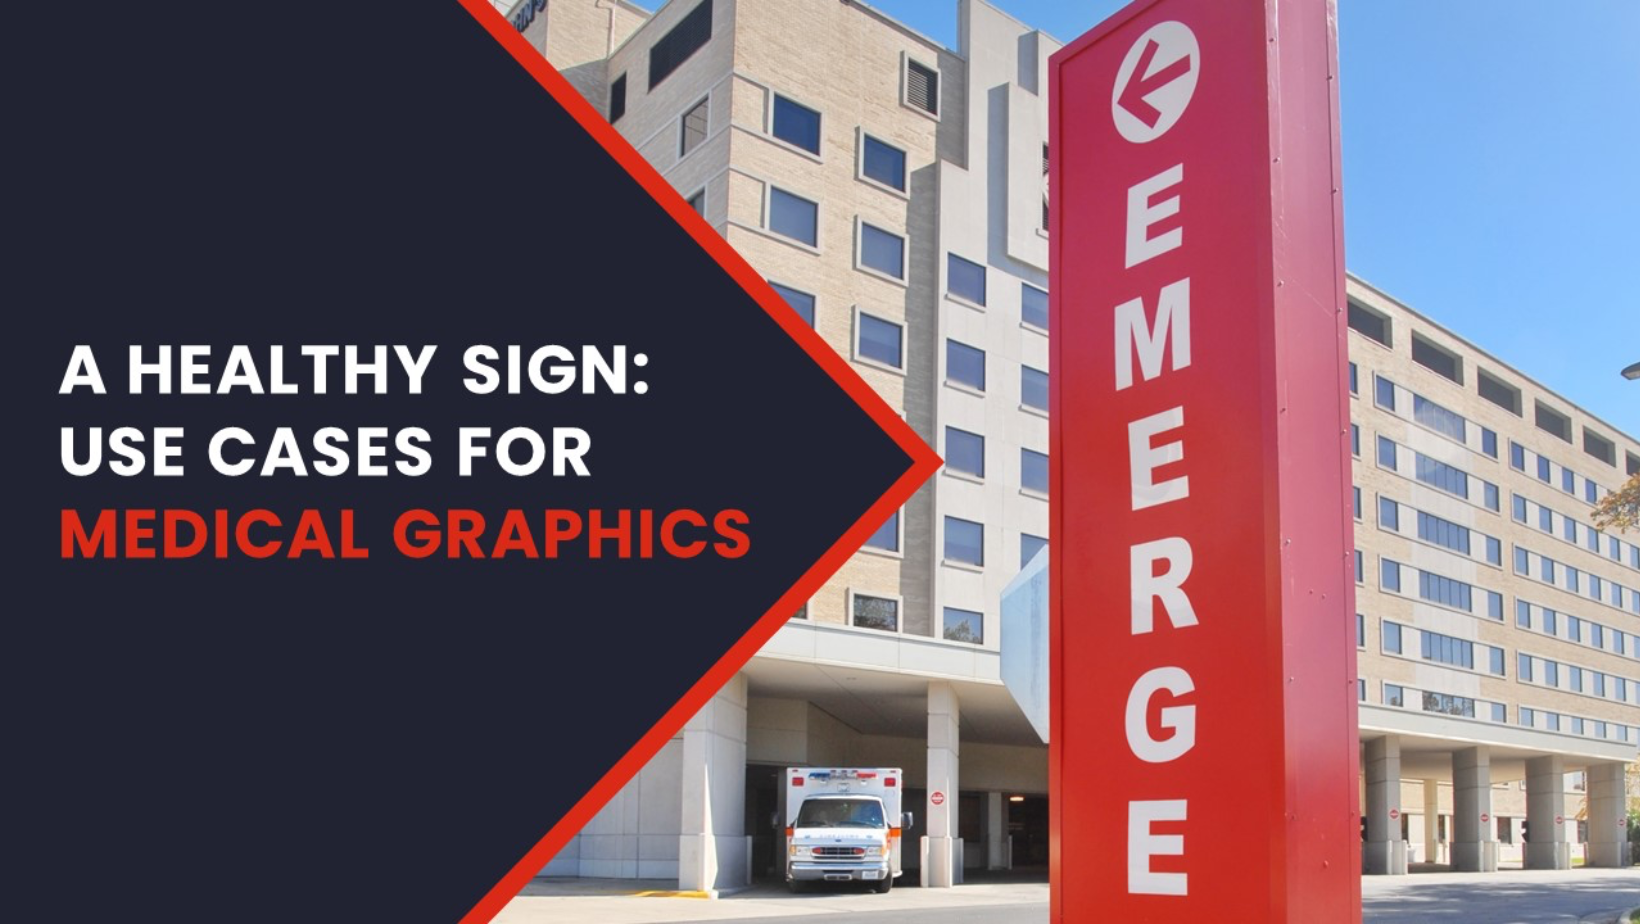 Emergency hospital sign with promotional graphics about a blog